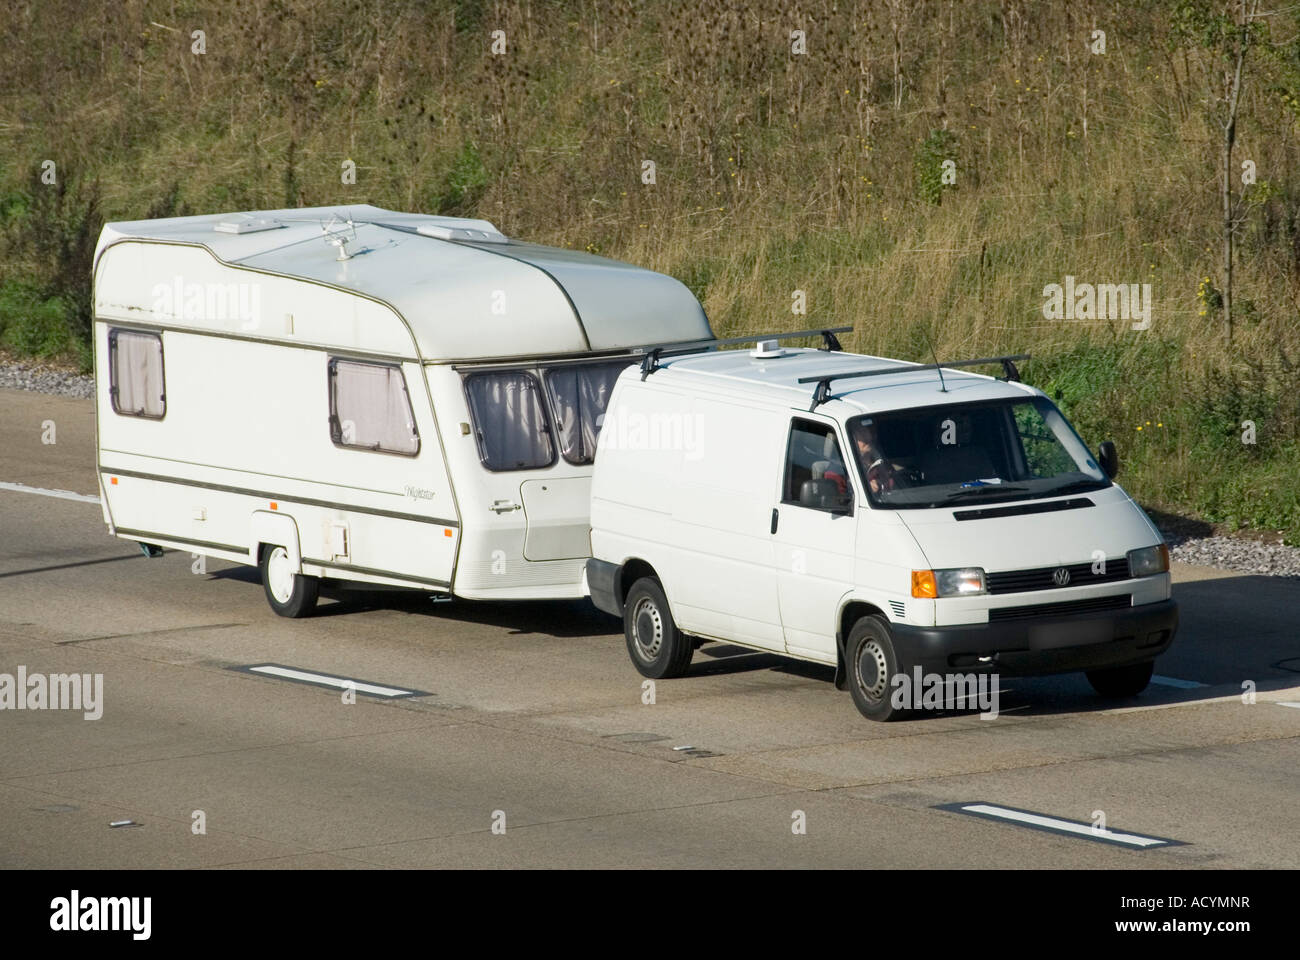 M25 motorway white van towing white caravan both clean unmarked with obscured number plate Stock Photo